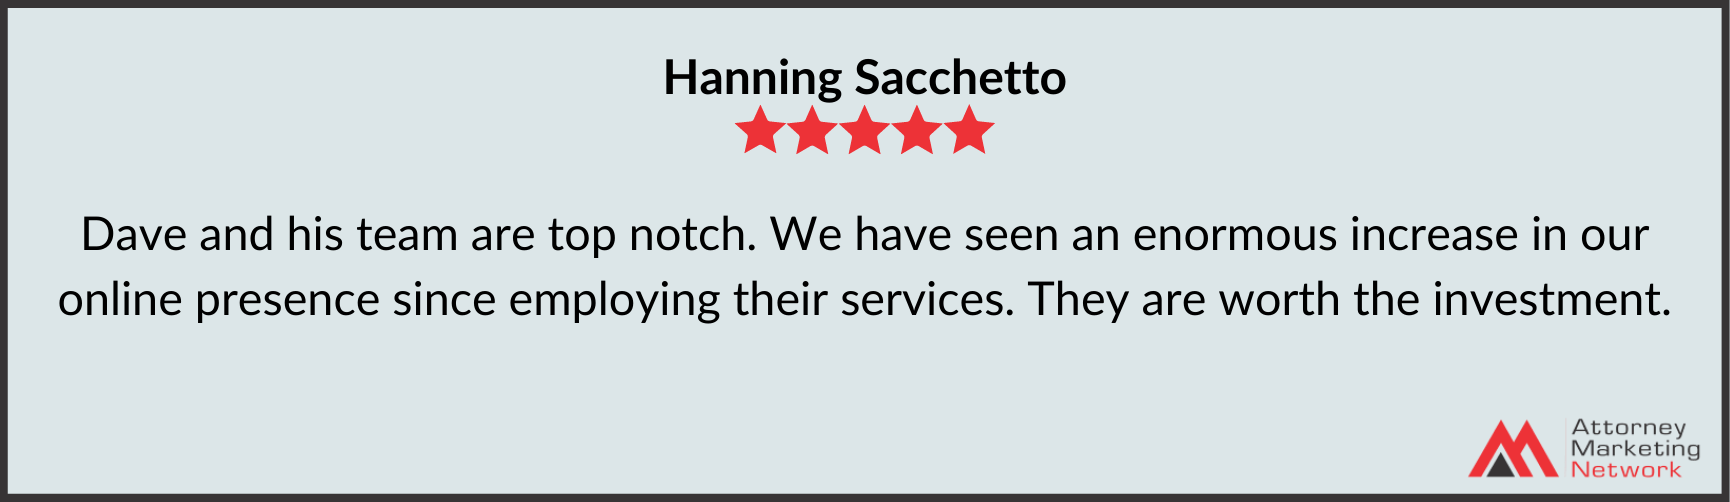 hanning sacchetto-reviews